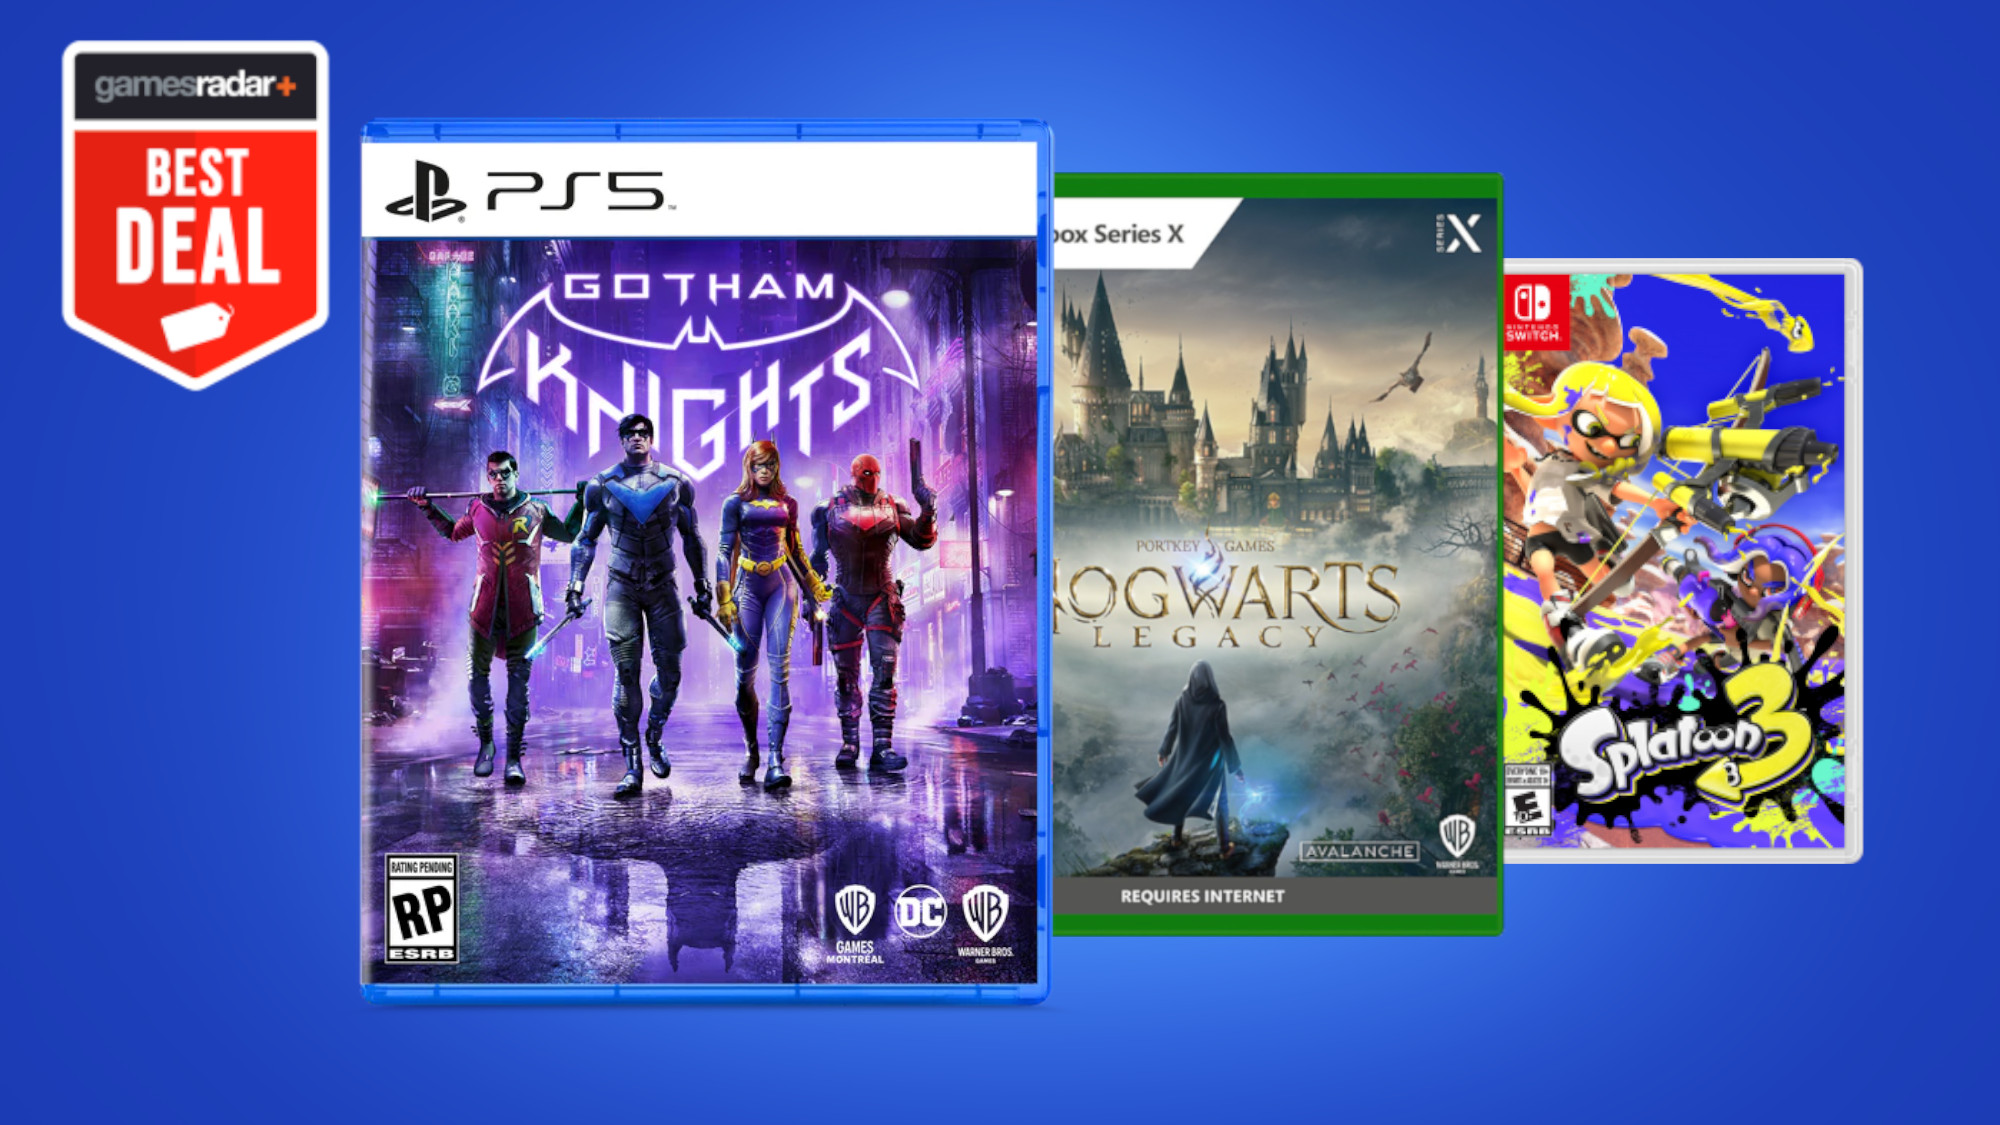 Get a free gift card when you preorder the latest games at Best Buy